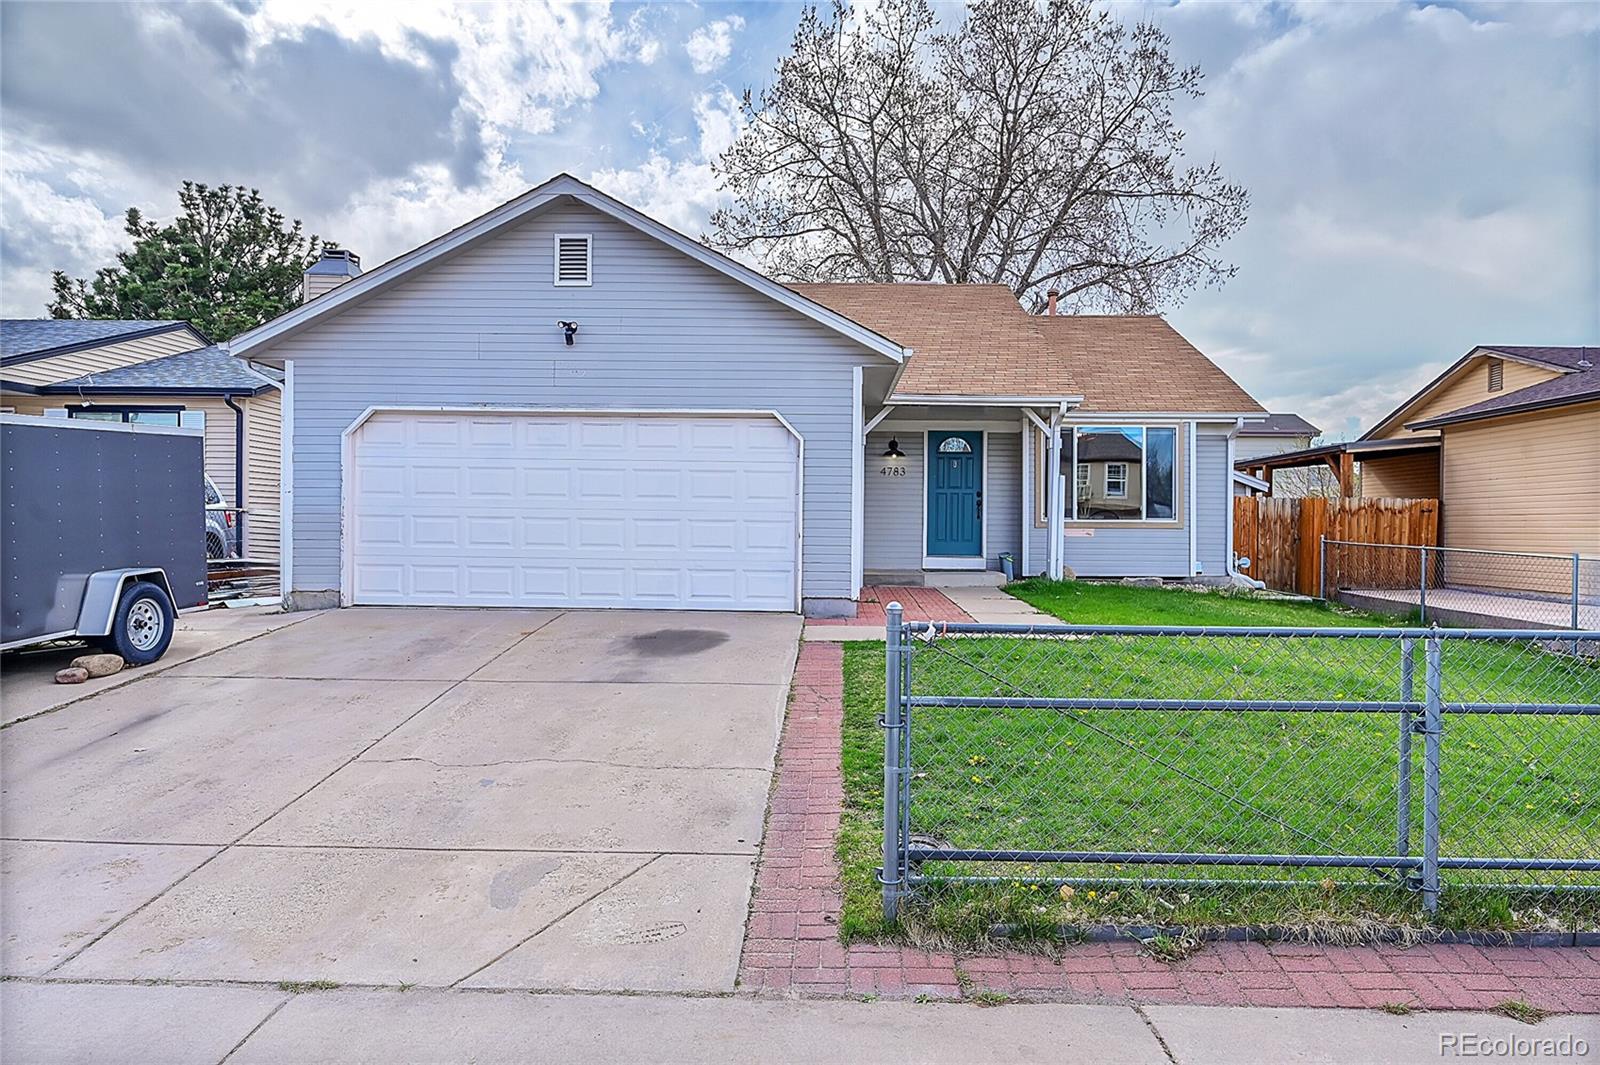 4783  dearborn street, Denver sold home. Closed on 2024-05-10 for $472,000.